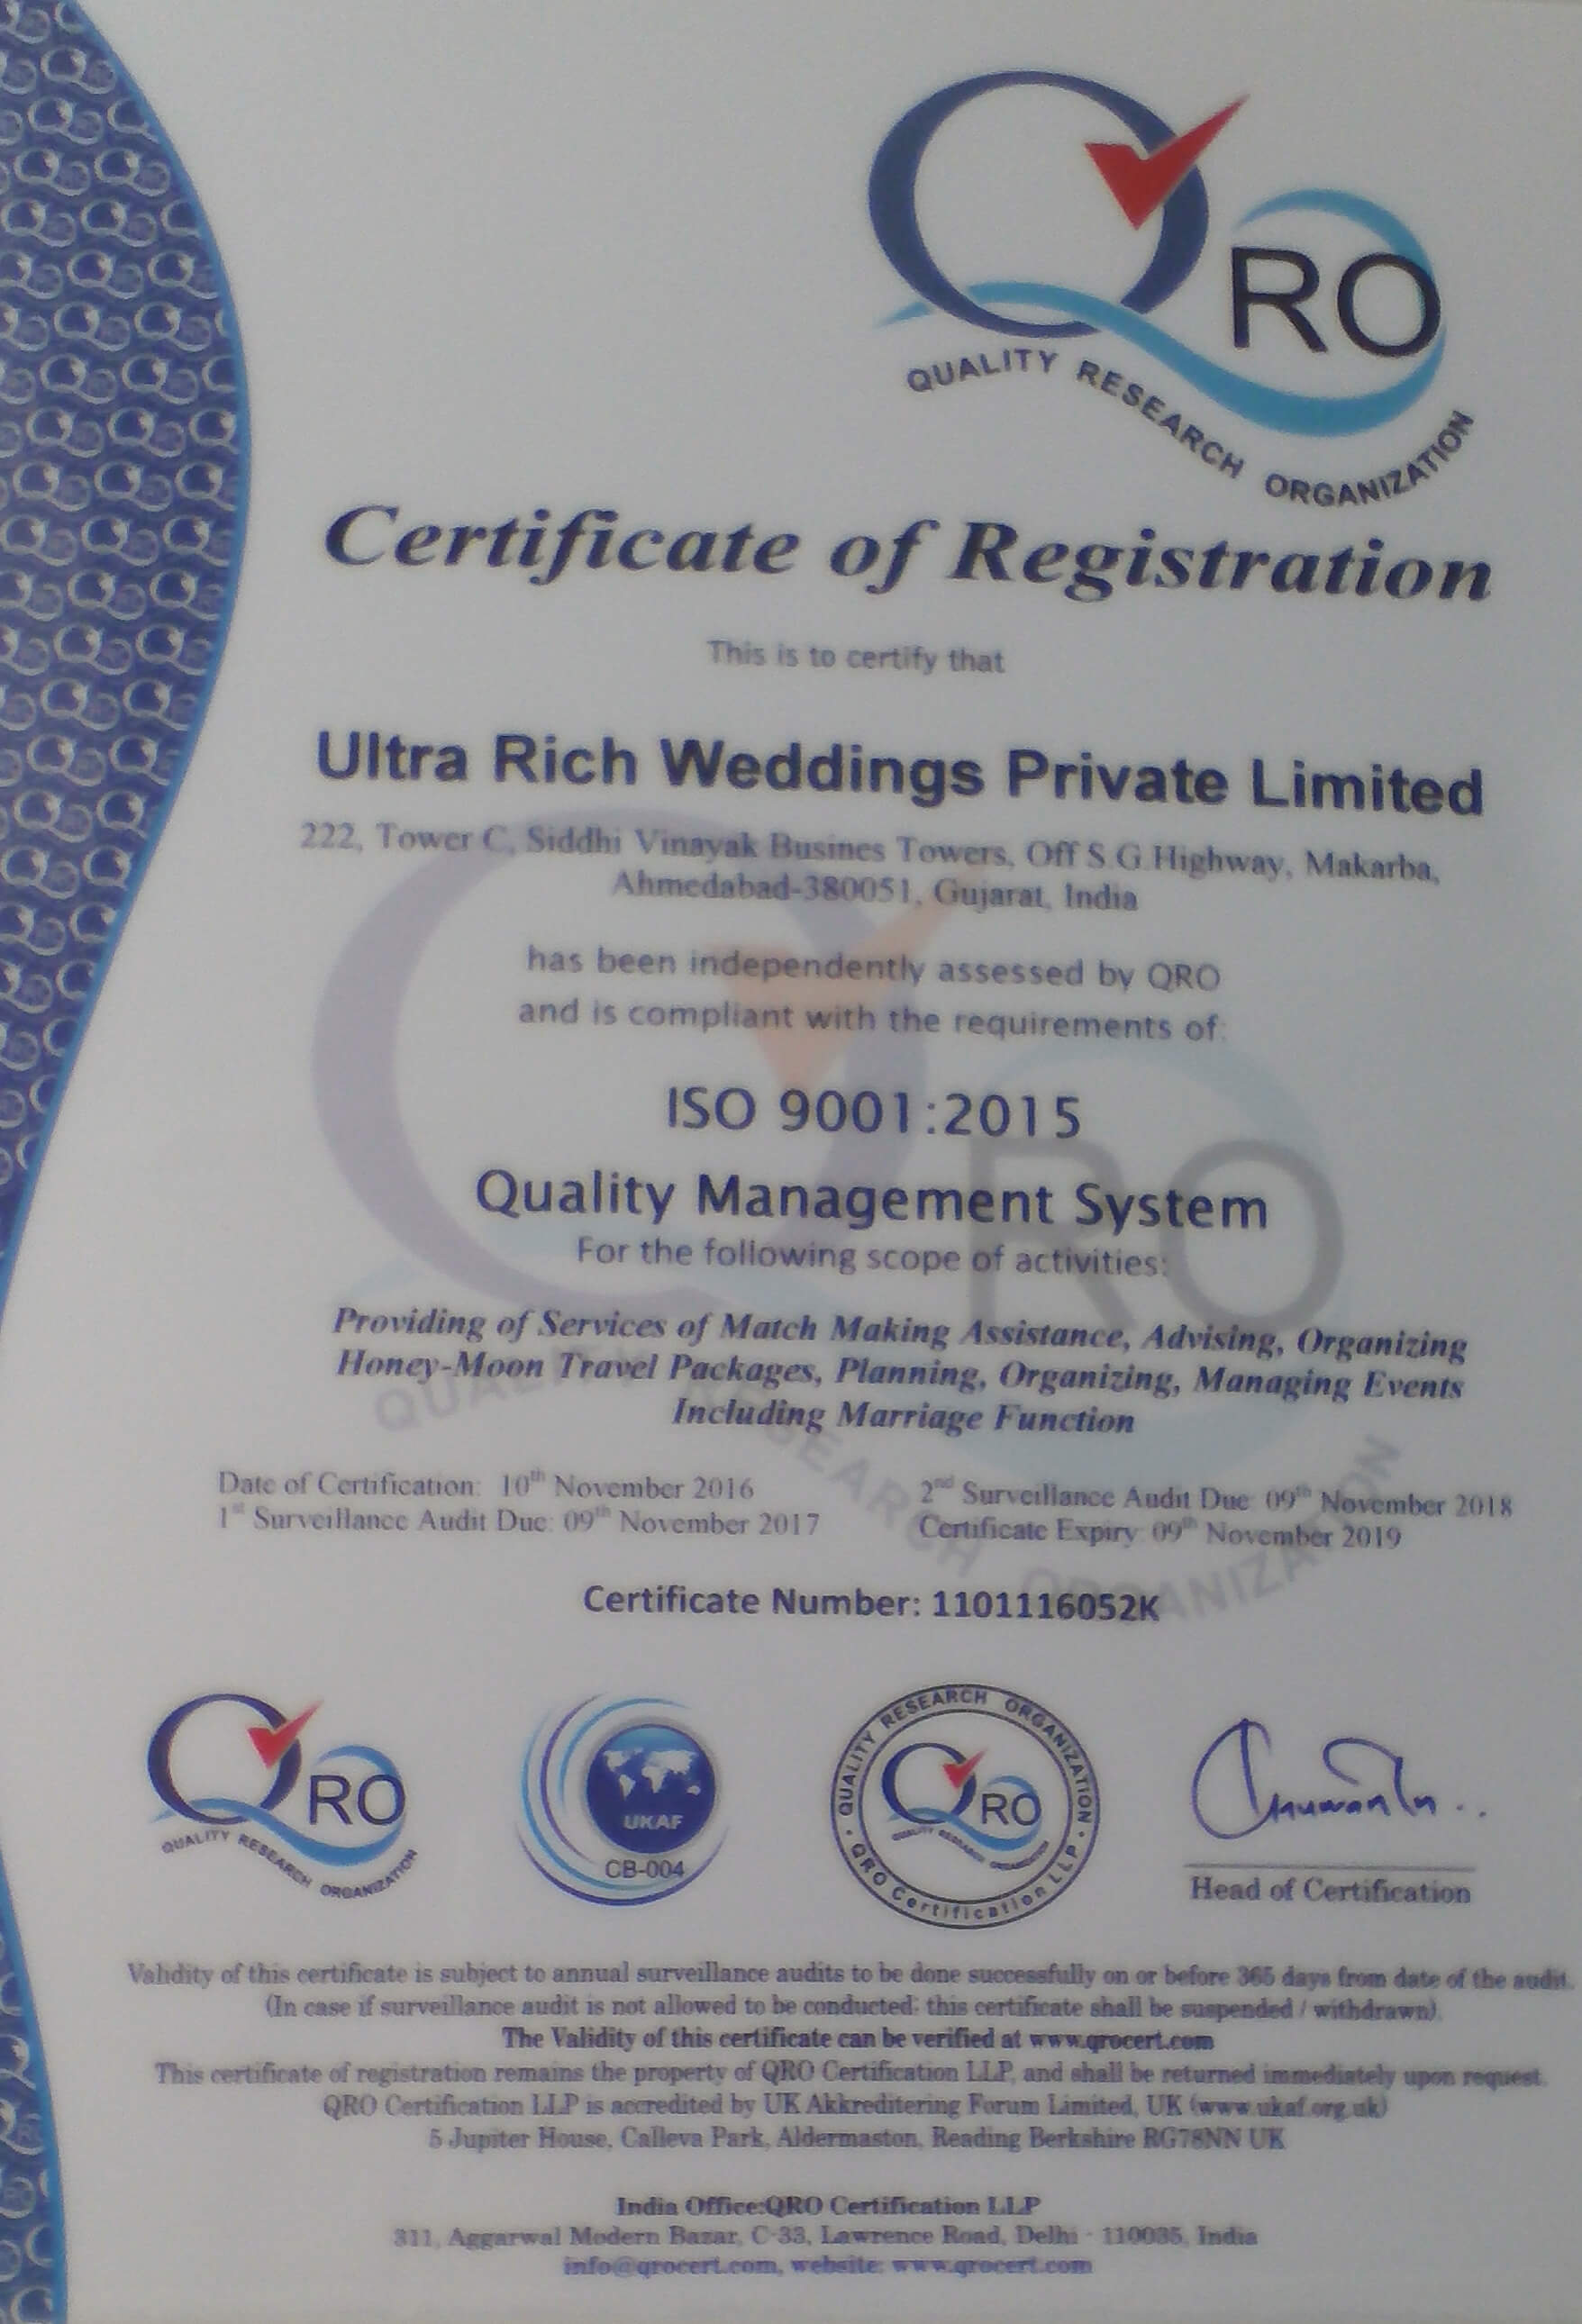 Ultra Rich Weddings Limited an ISO 9001: 2008 Certified Company